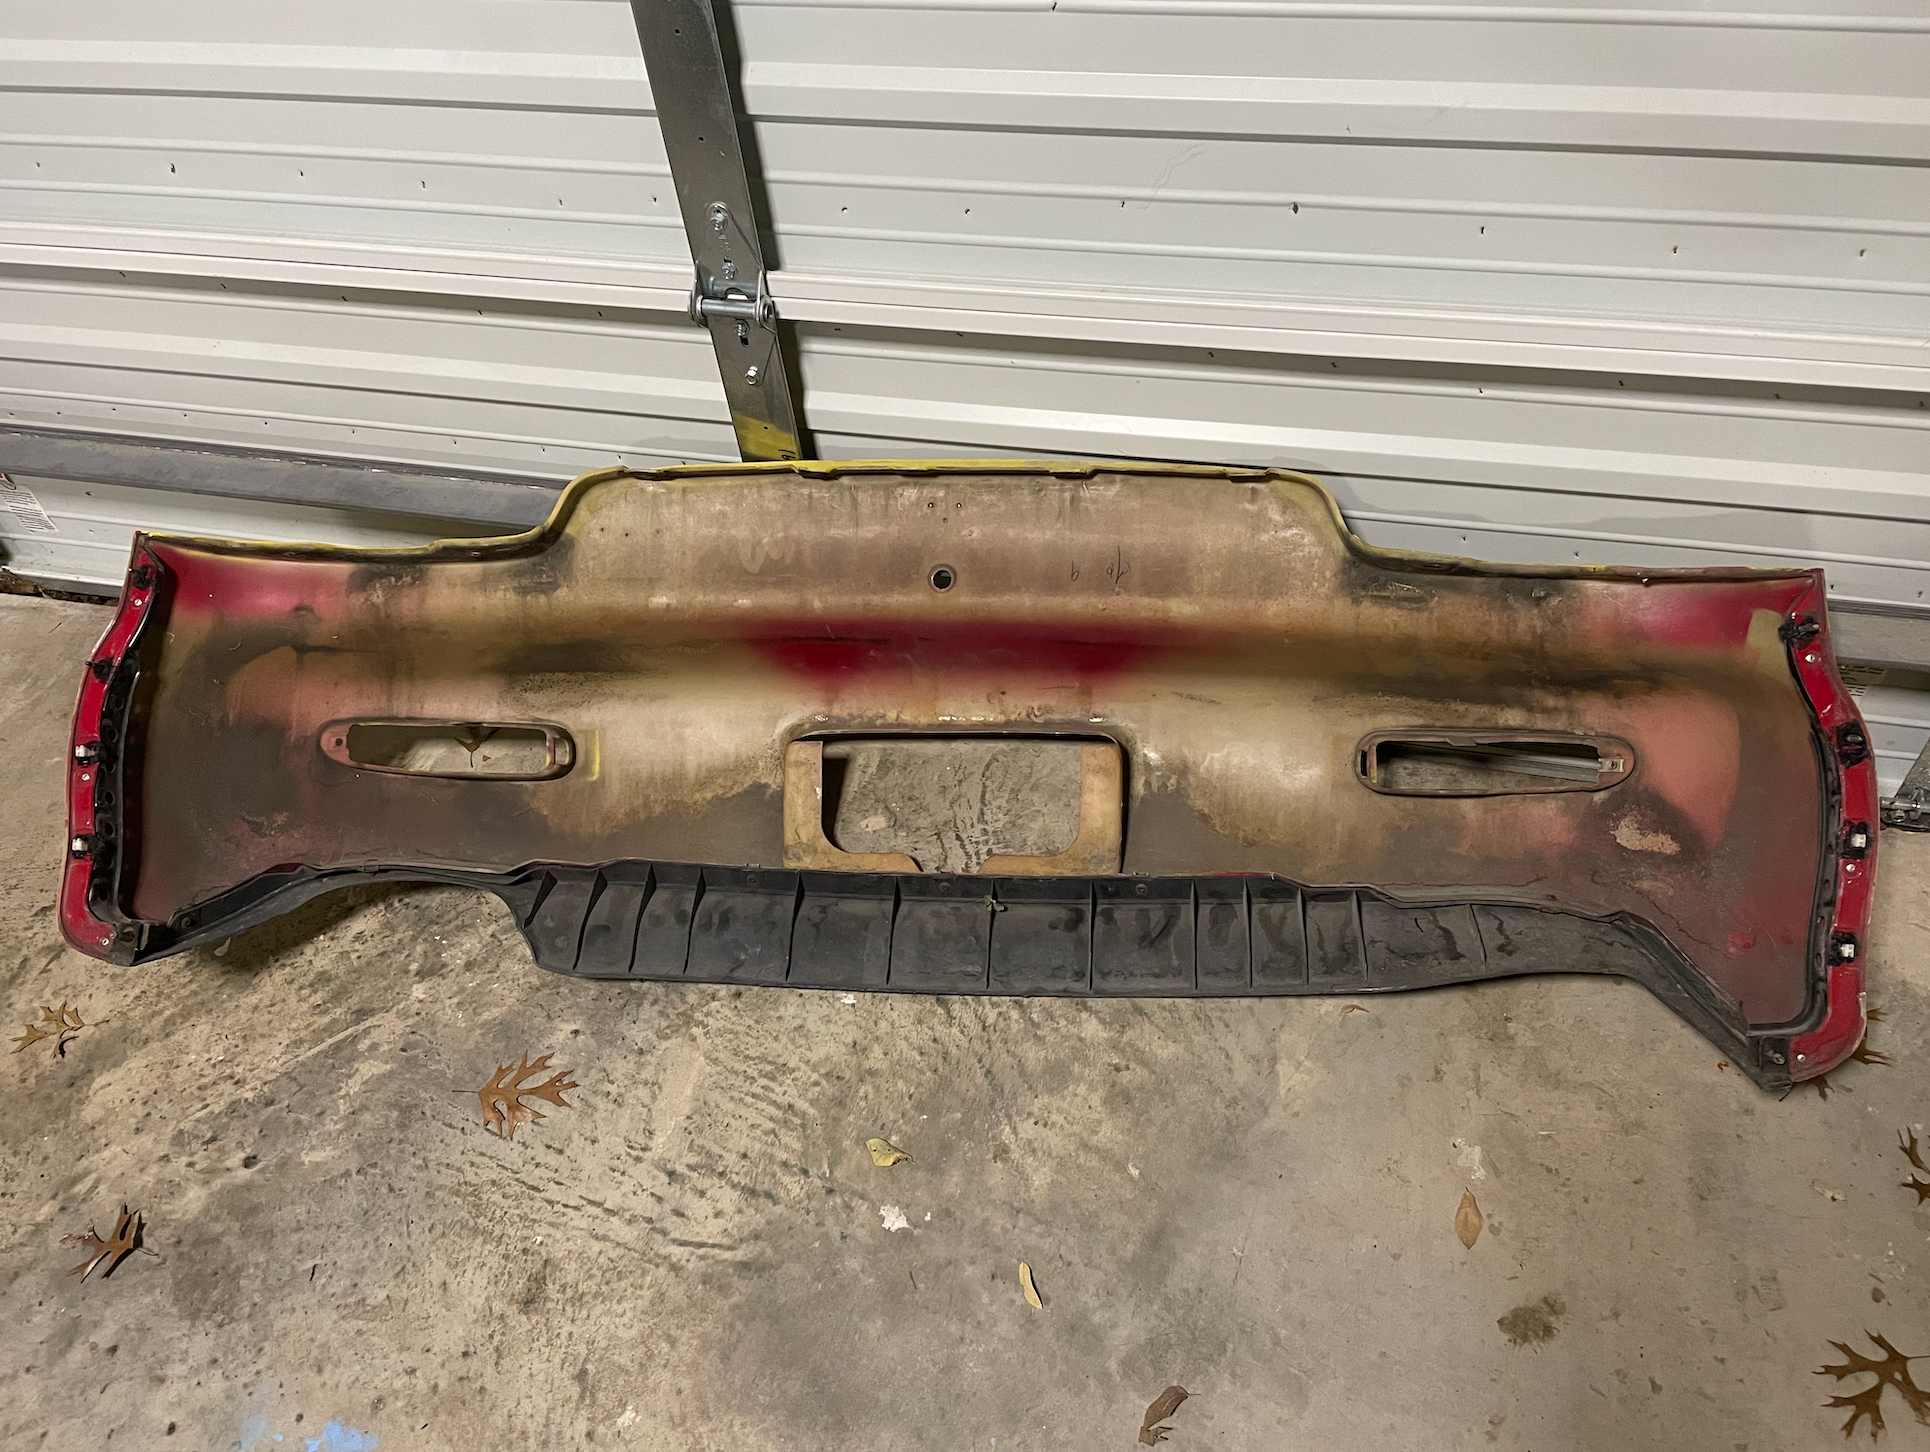 Exterior Body Parts - FD RX-7 Rear Bumper + Efini badge + RX-7 Badge (CYM Paint) - Used - 0  All Models - Fort Worth, TX 76111, United States